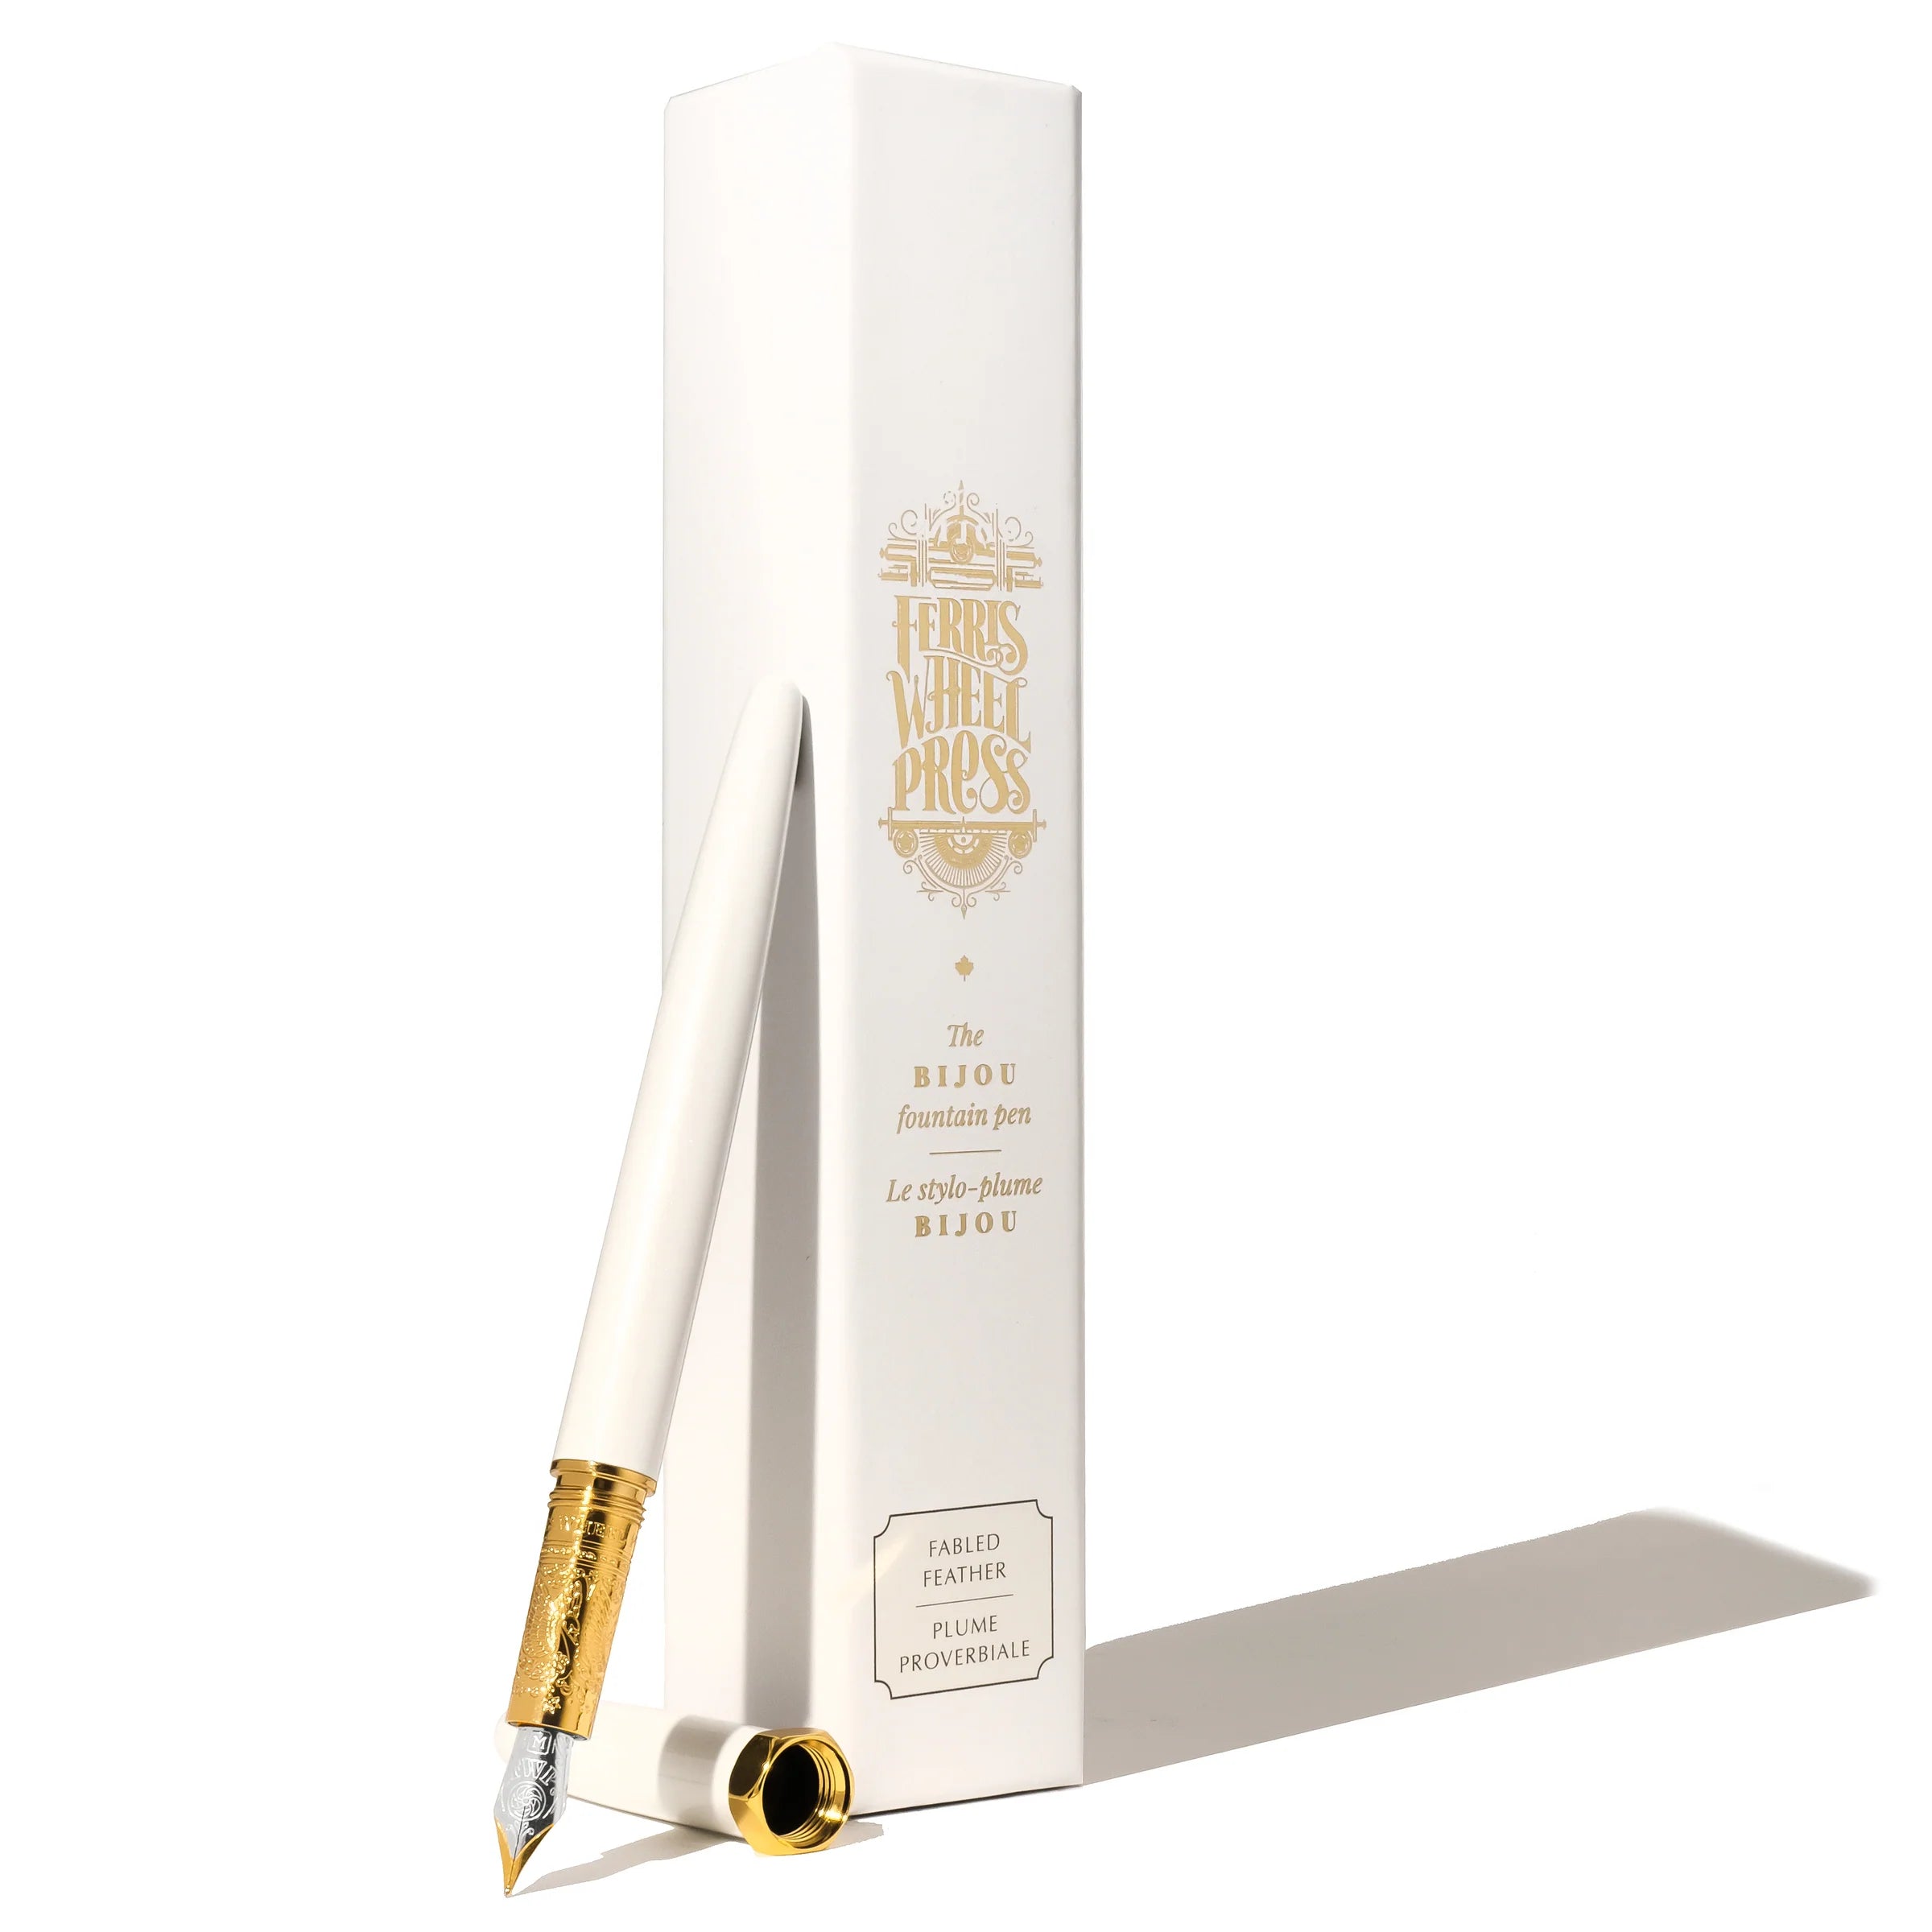 Ferris Wheel Press The Bijou Fountain Pen - Fabled Feather - white and gold with packaging - Paper Kooka Australia